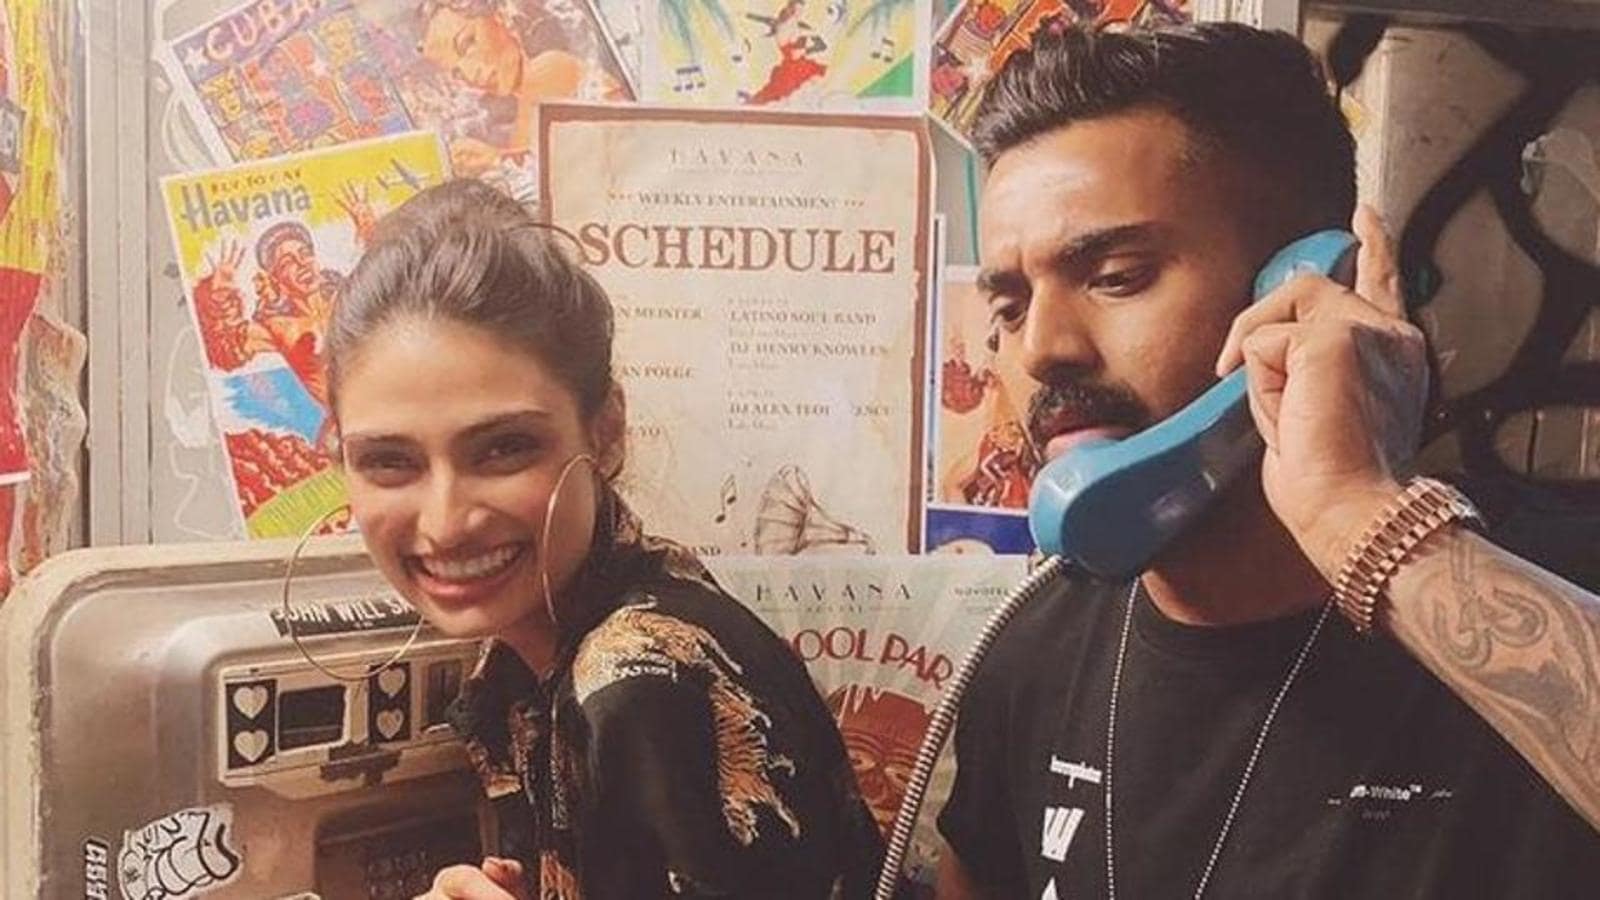 EXCLUSIVE: Has KL Rahul finally made it official with Athiya Shetty? -  Hindustan Times